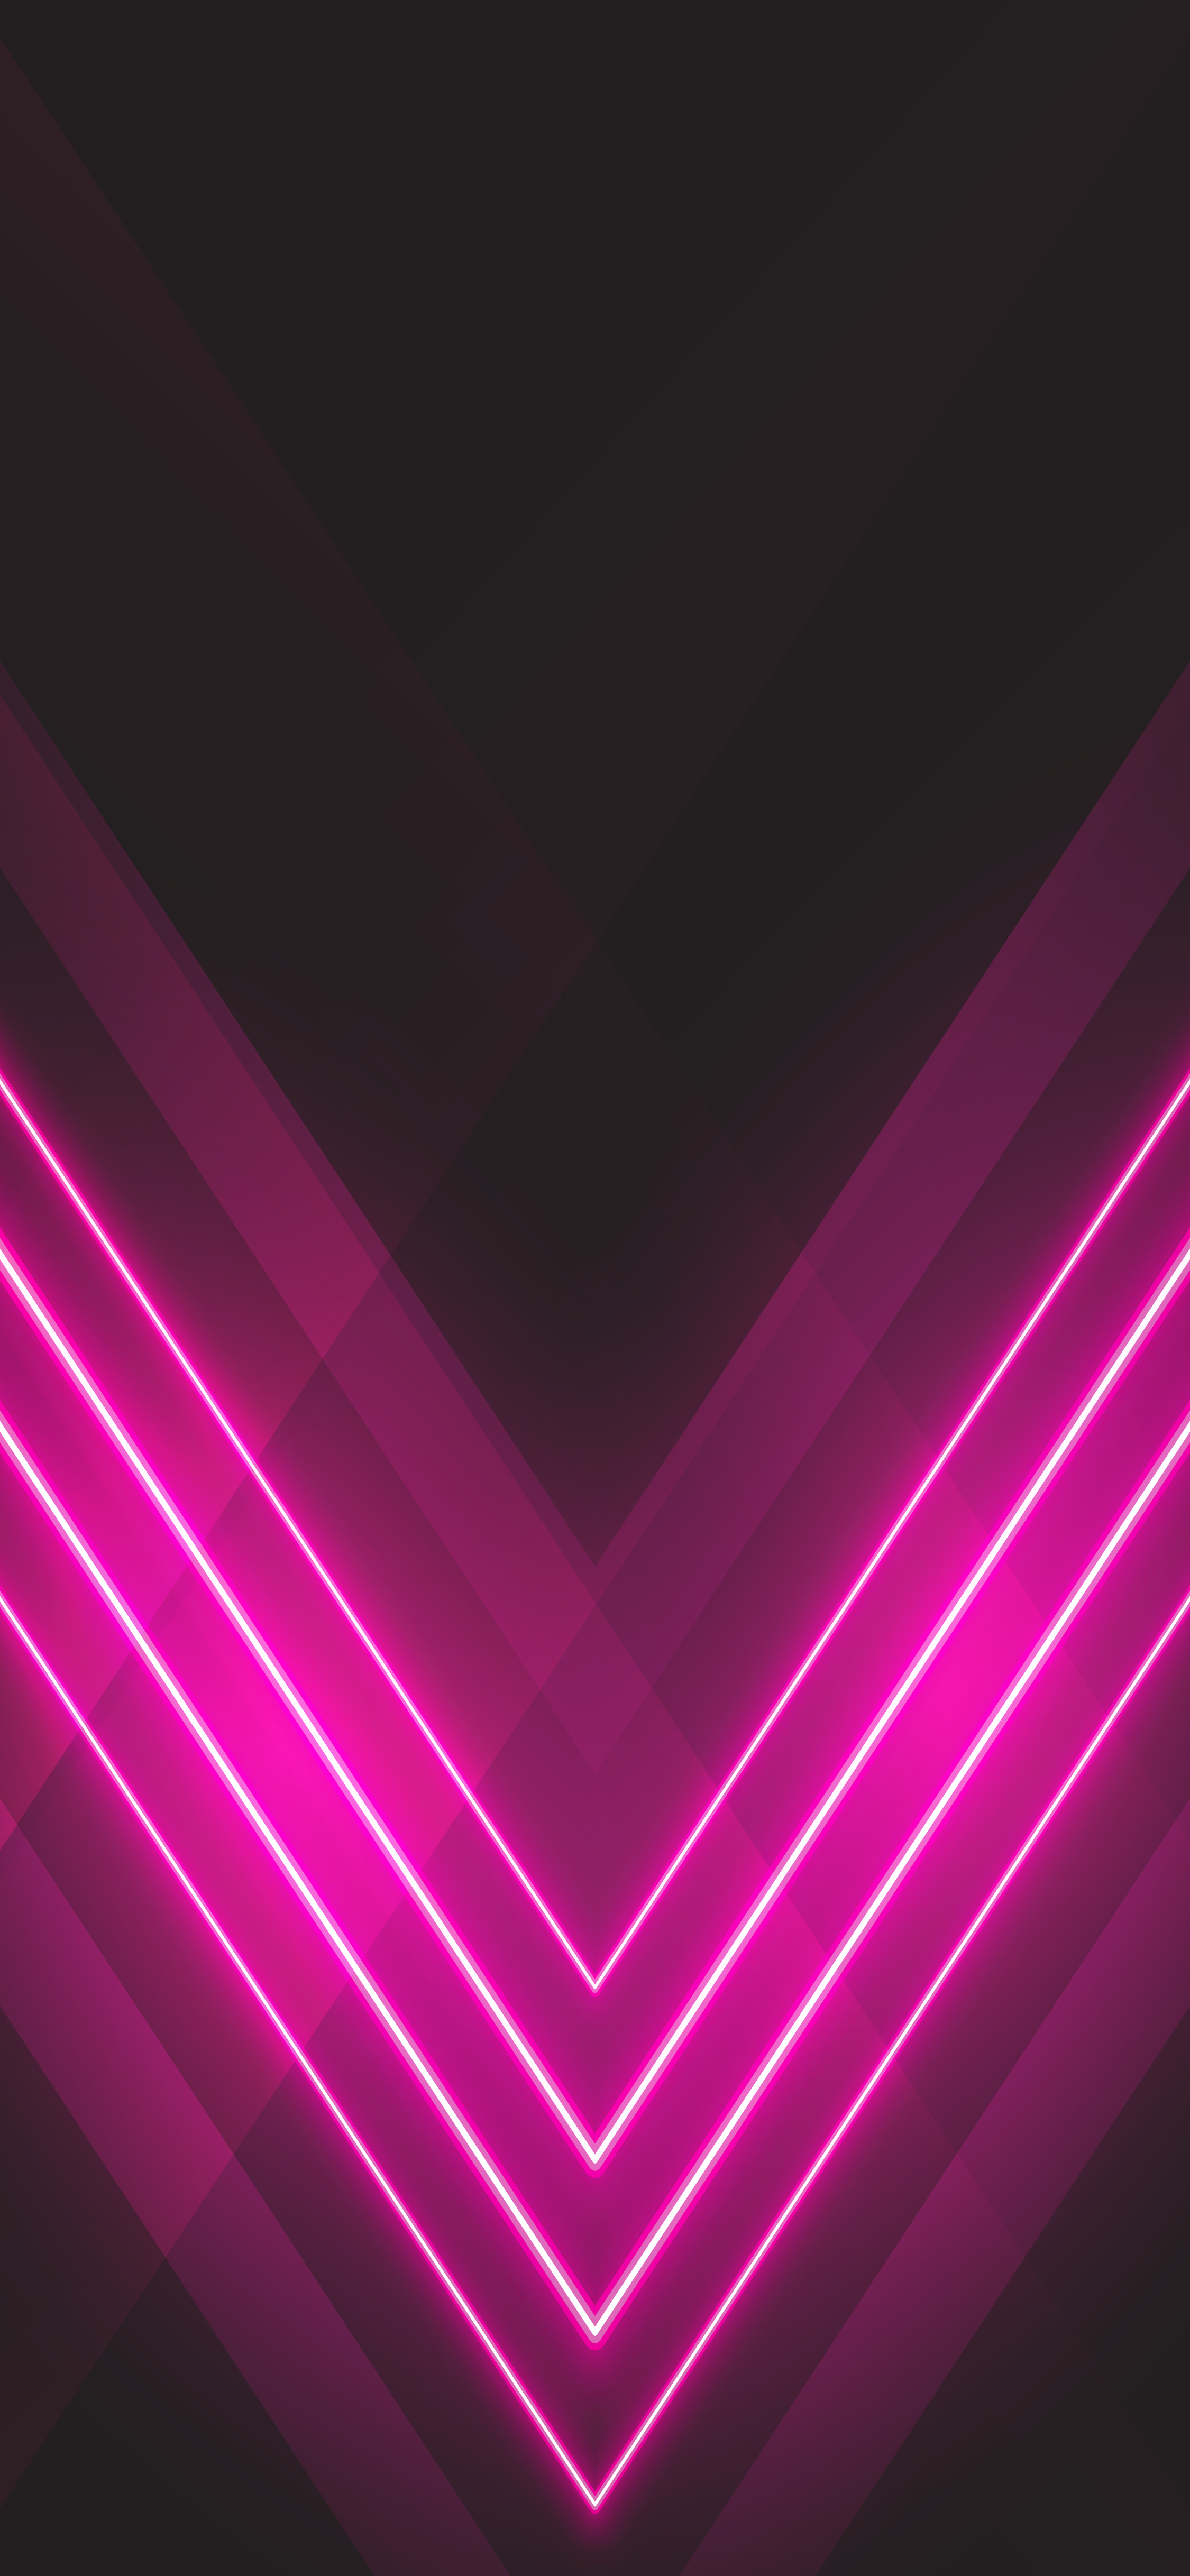 Neon light effect image adapted to use as phone wallpaper.